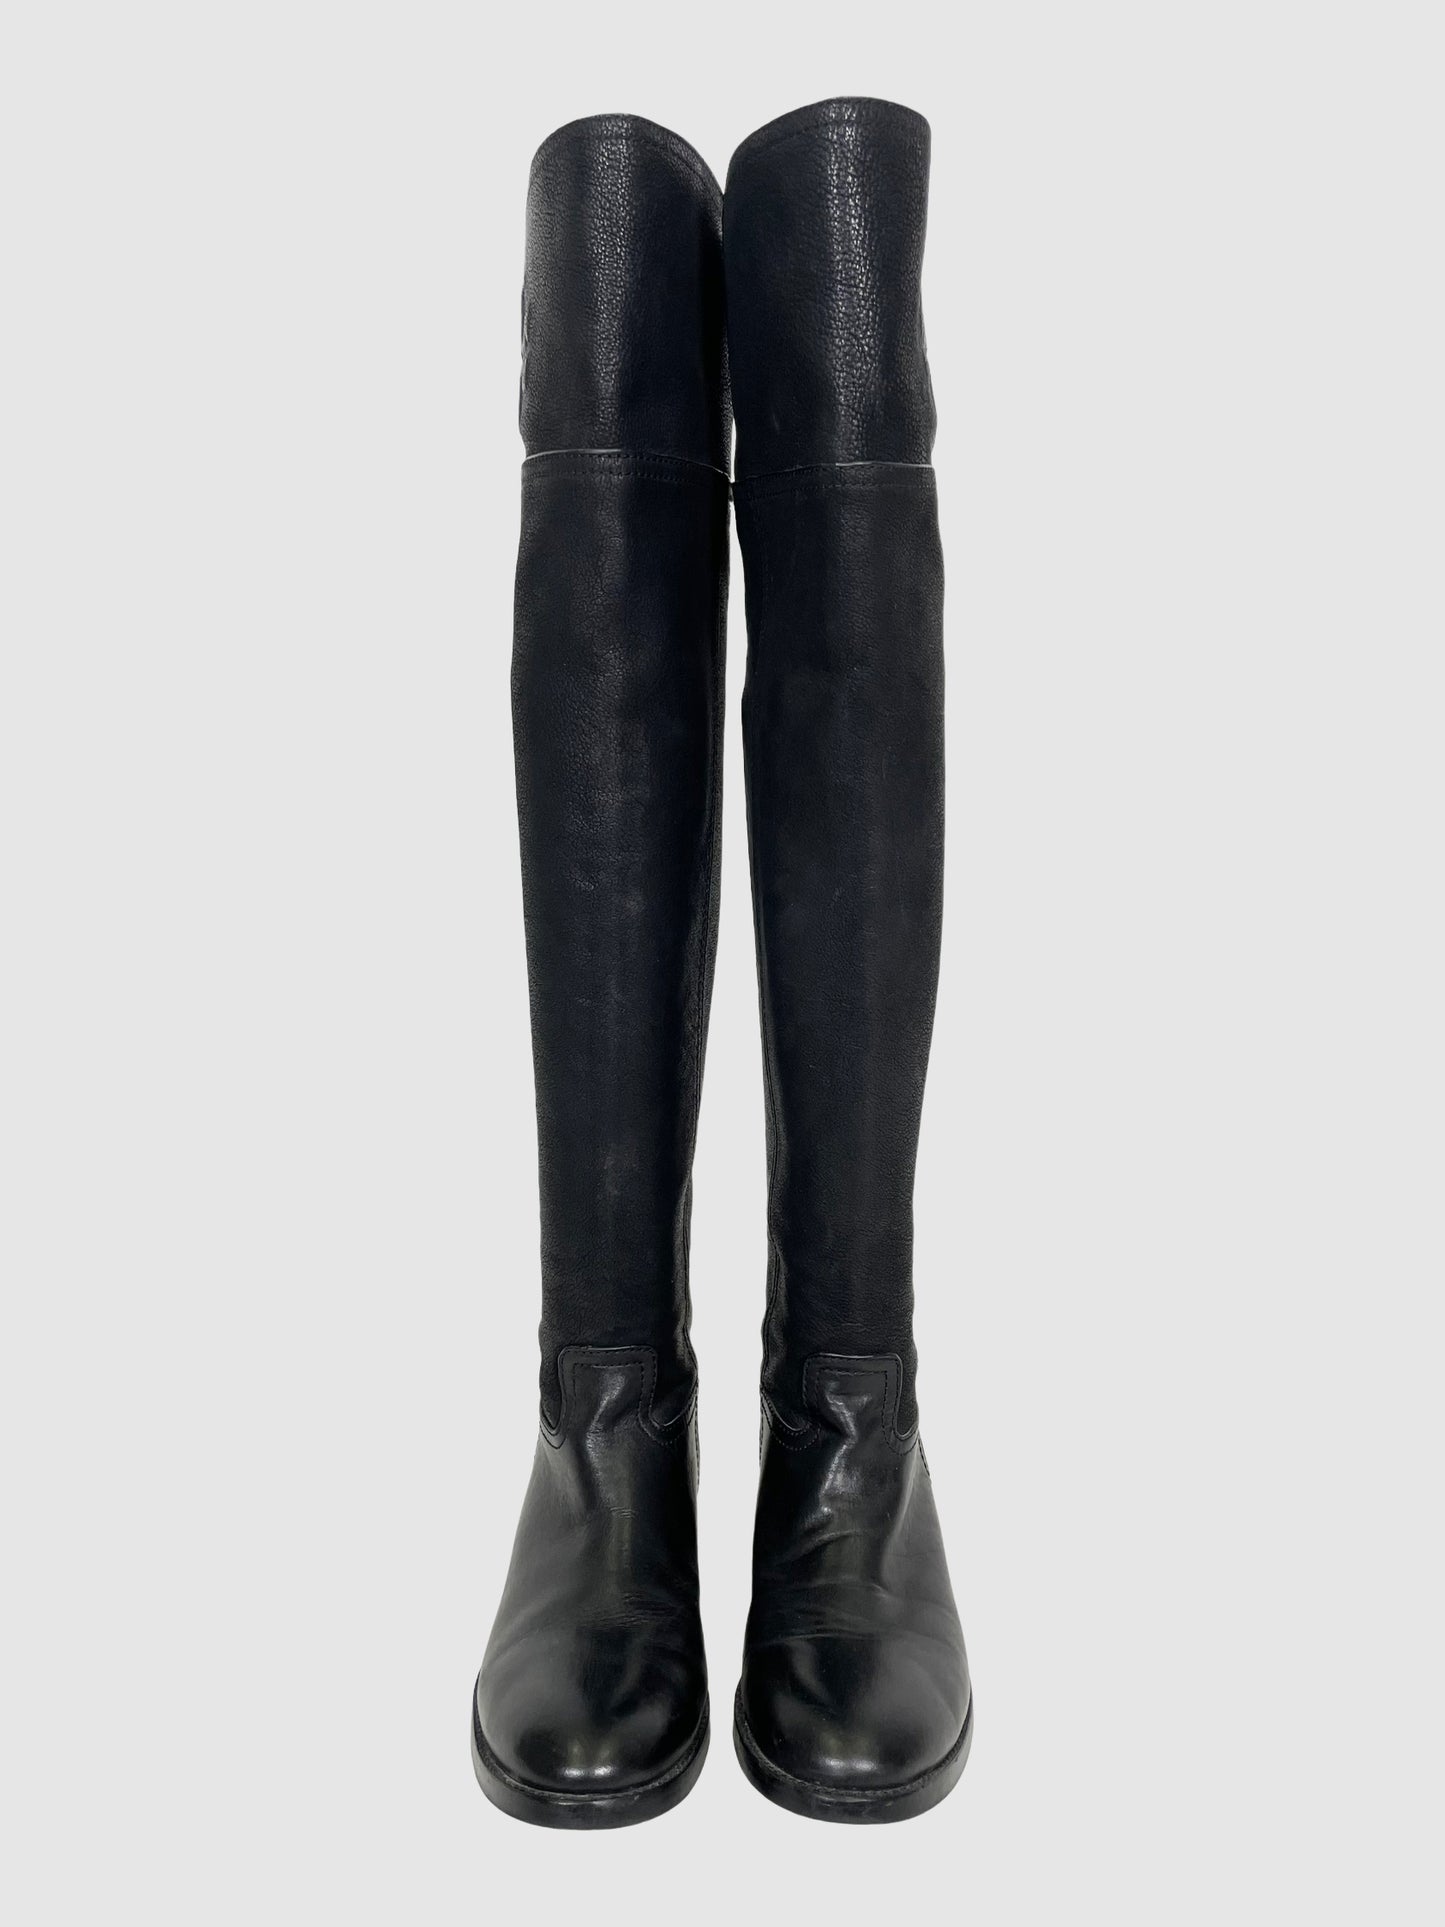 Tory Burch Over the Knee Boots - Size 6